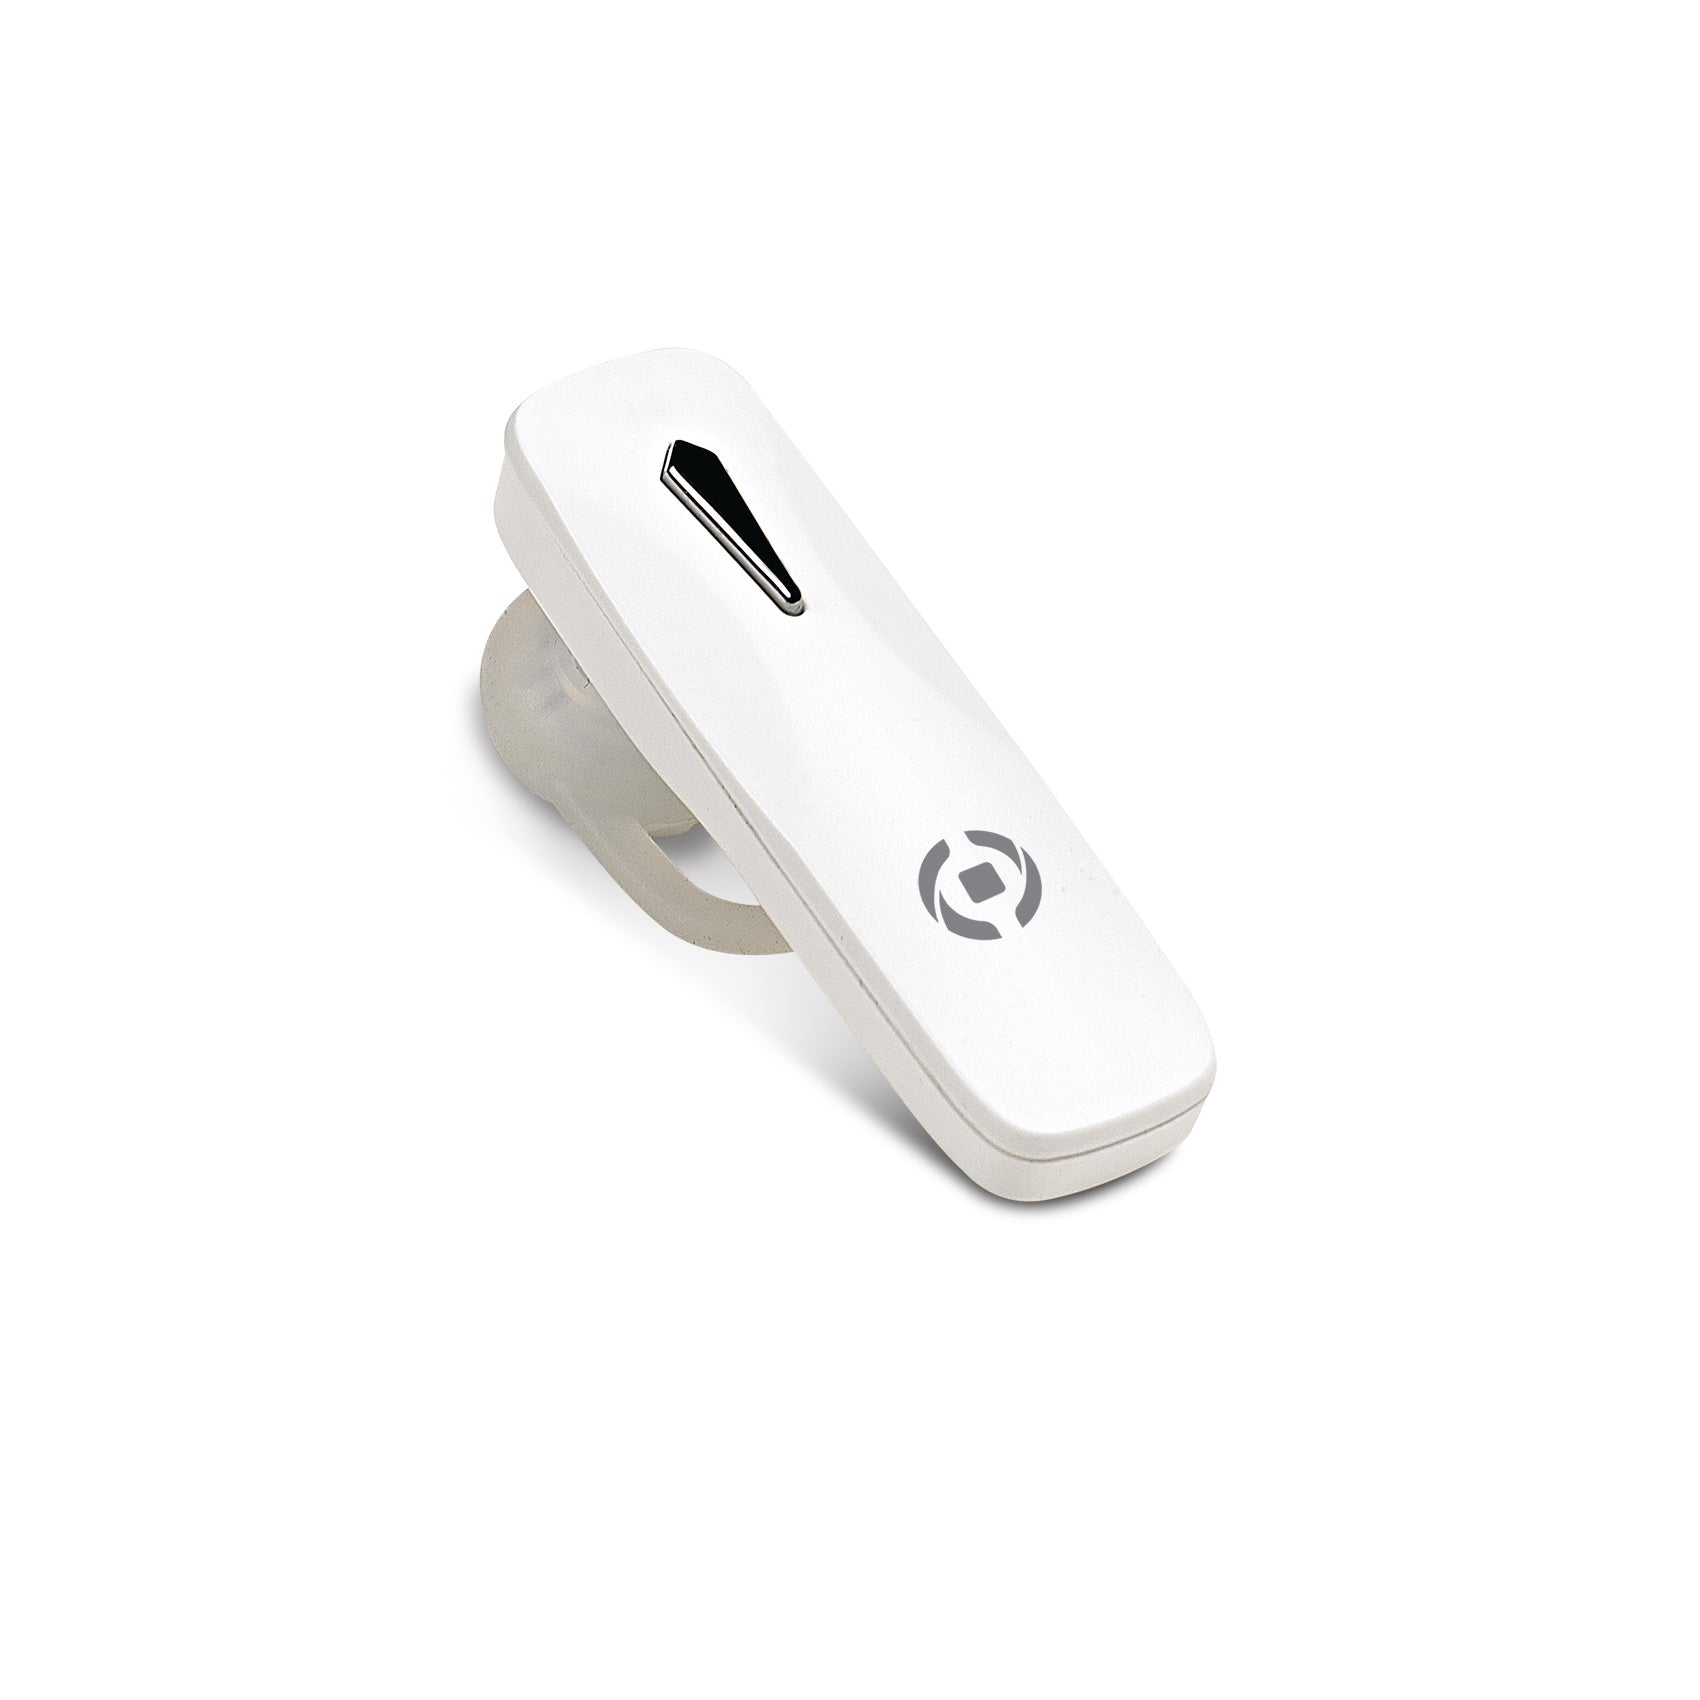 Celly BLUETOOTH HEADSET BH10 WHITE